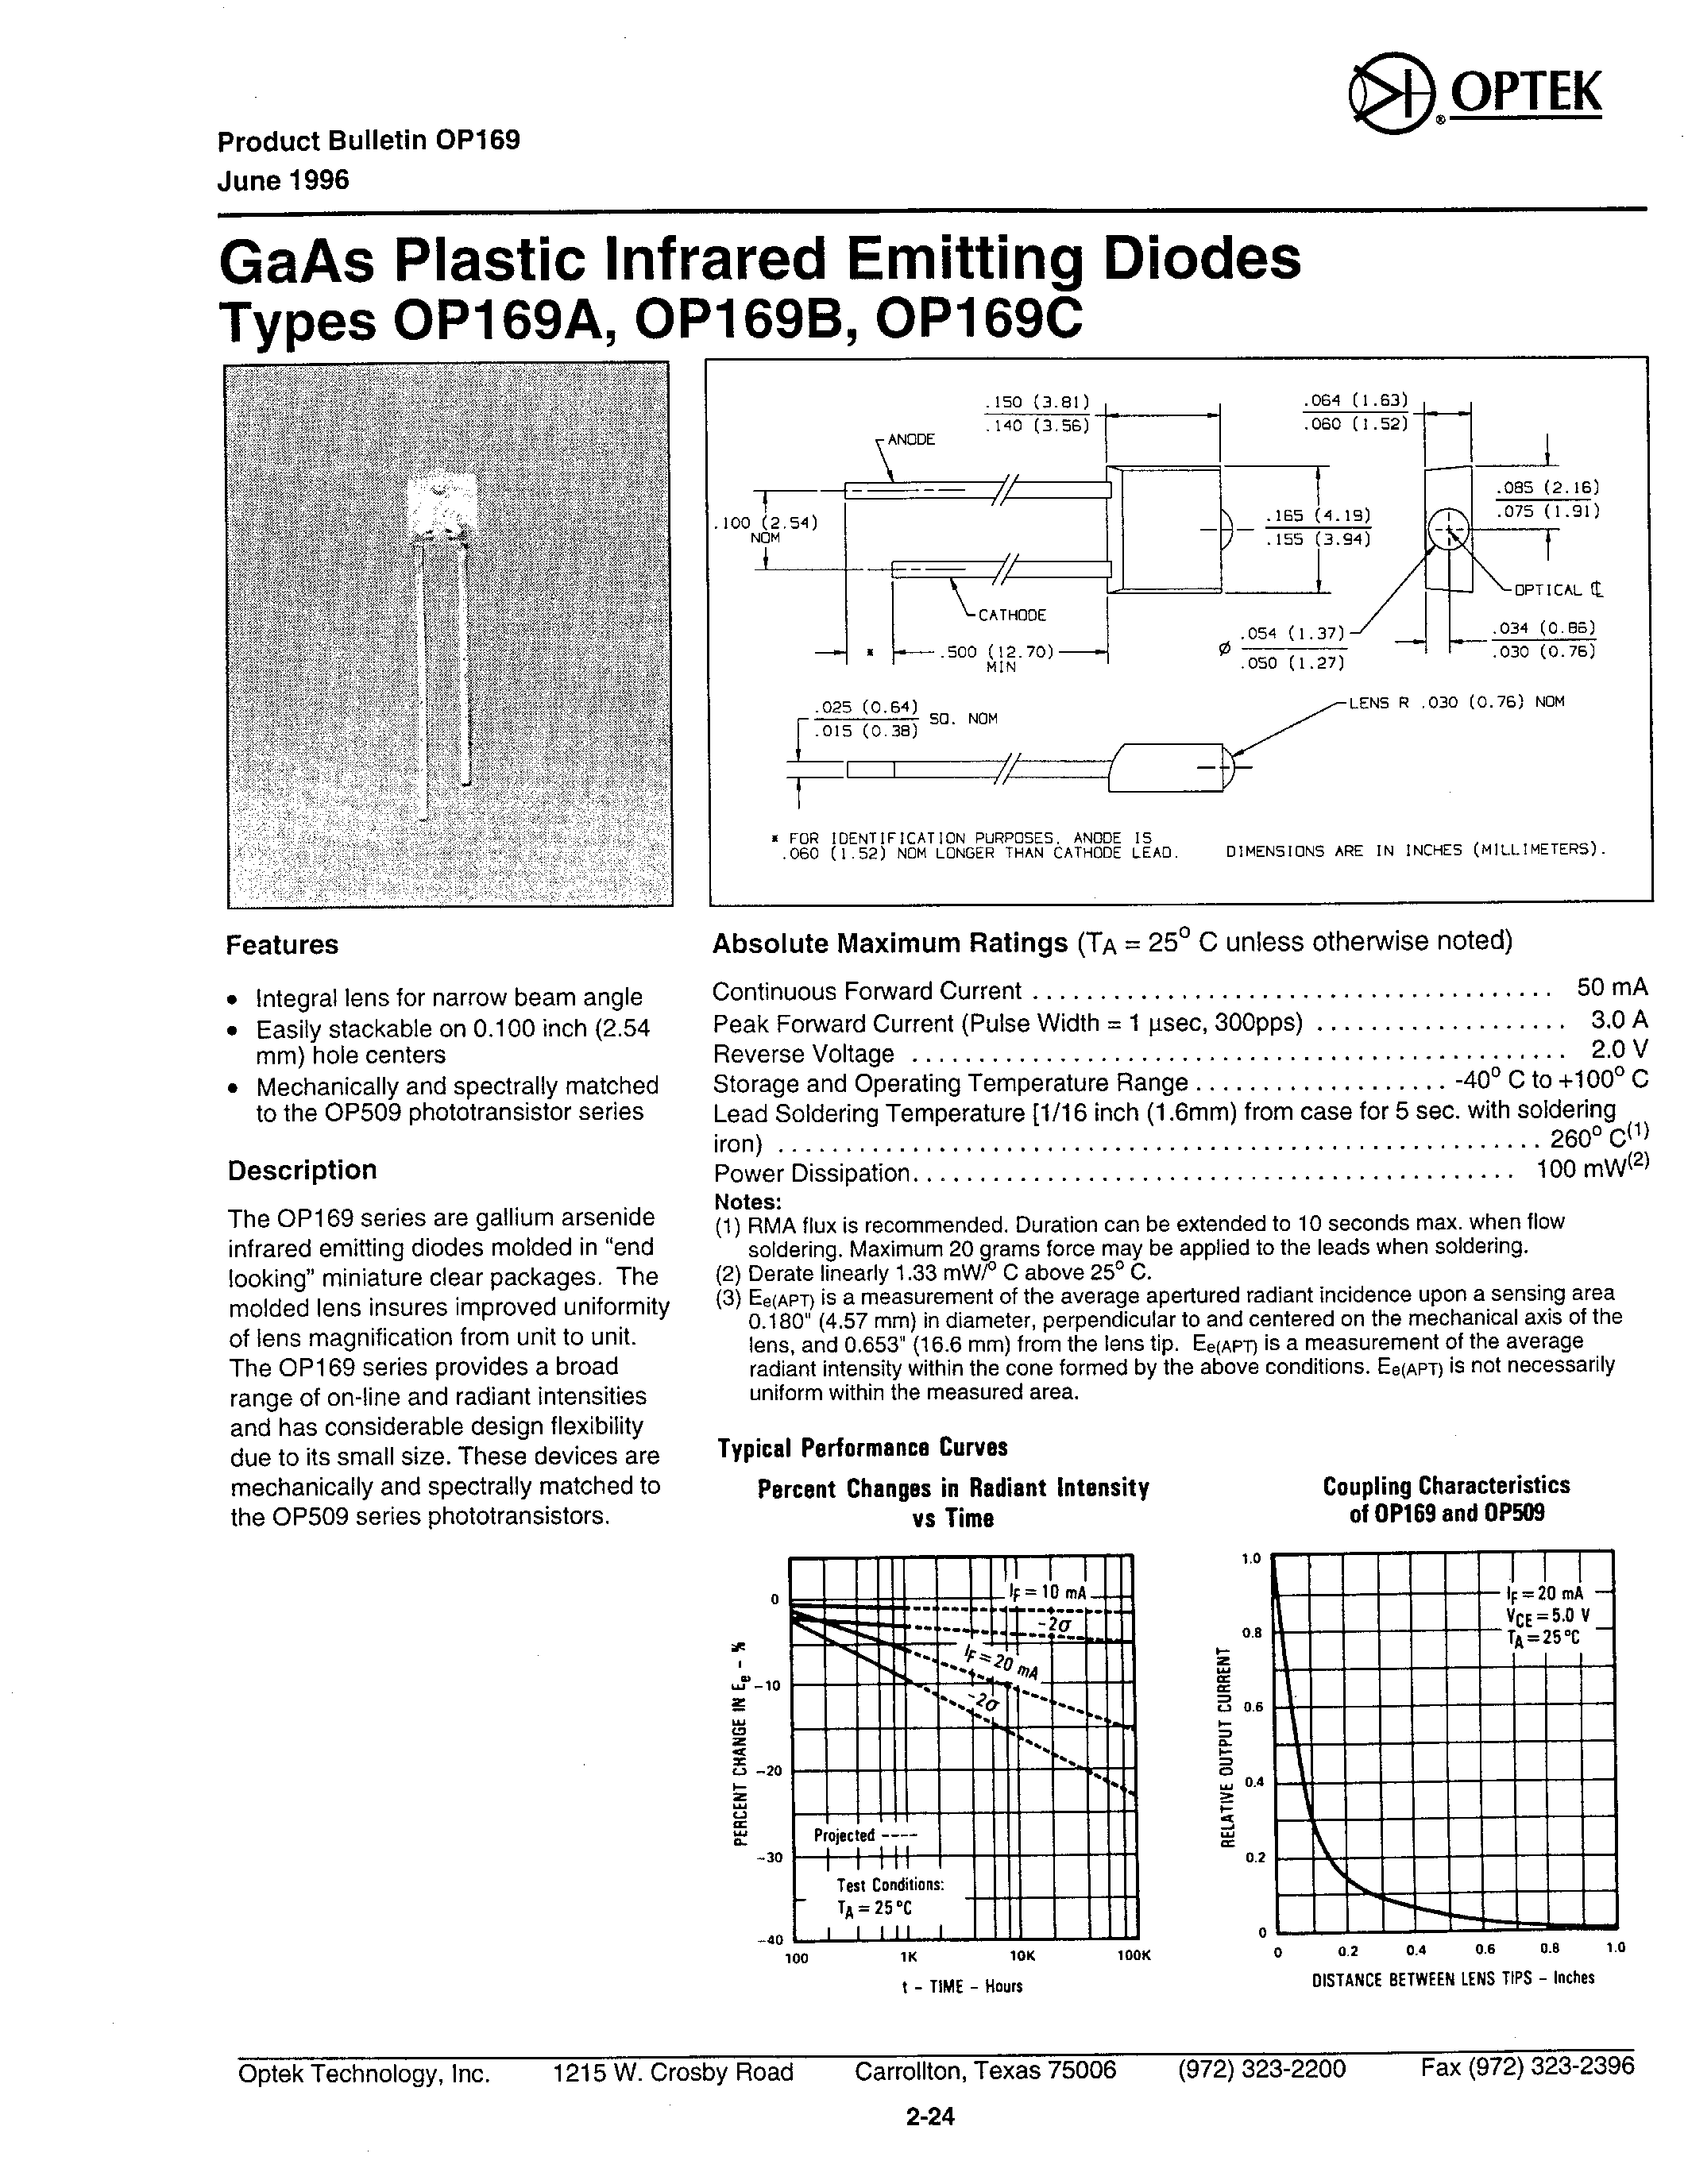 Datasheet OP169A - GaAs Plastic Infrared Emitting Diodes page 1